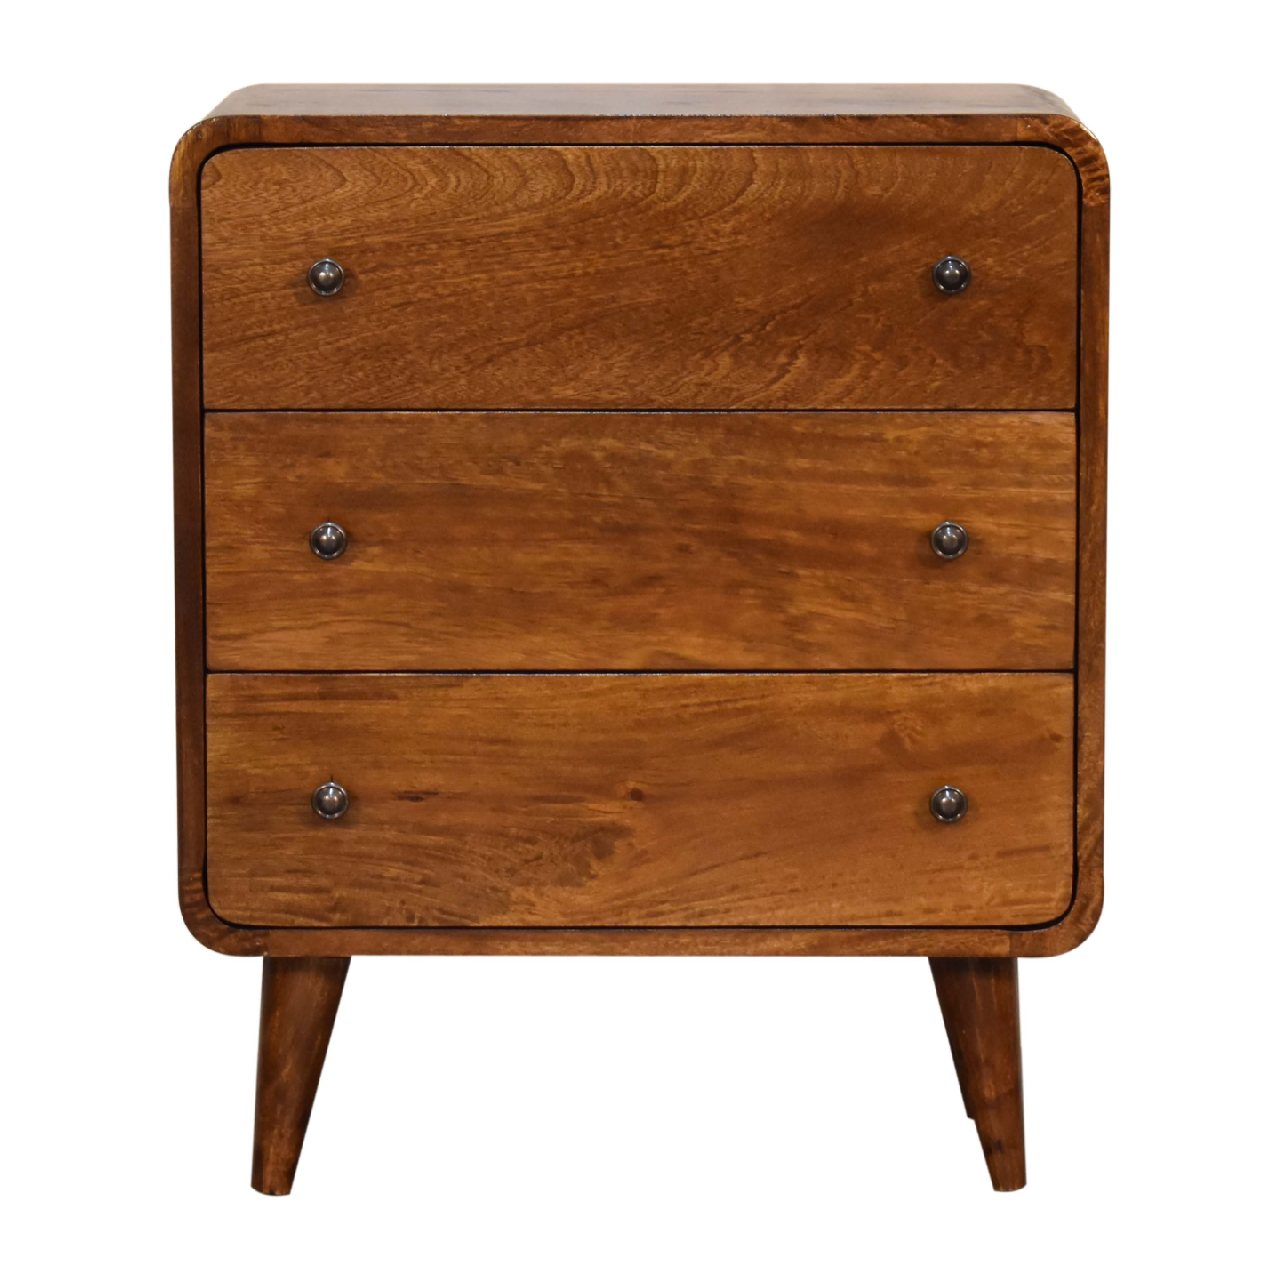 View Mini Curved Chestnut Chest information